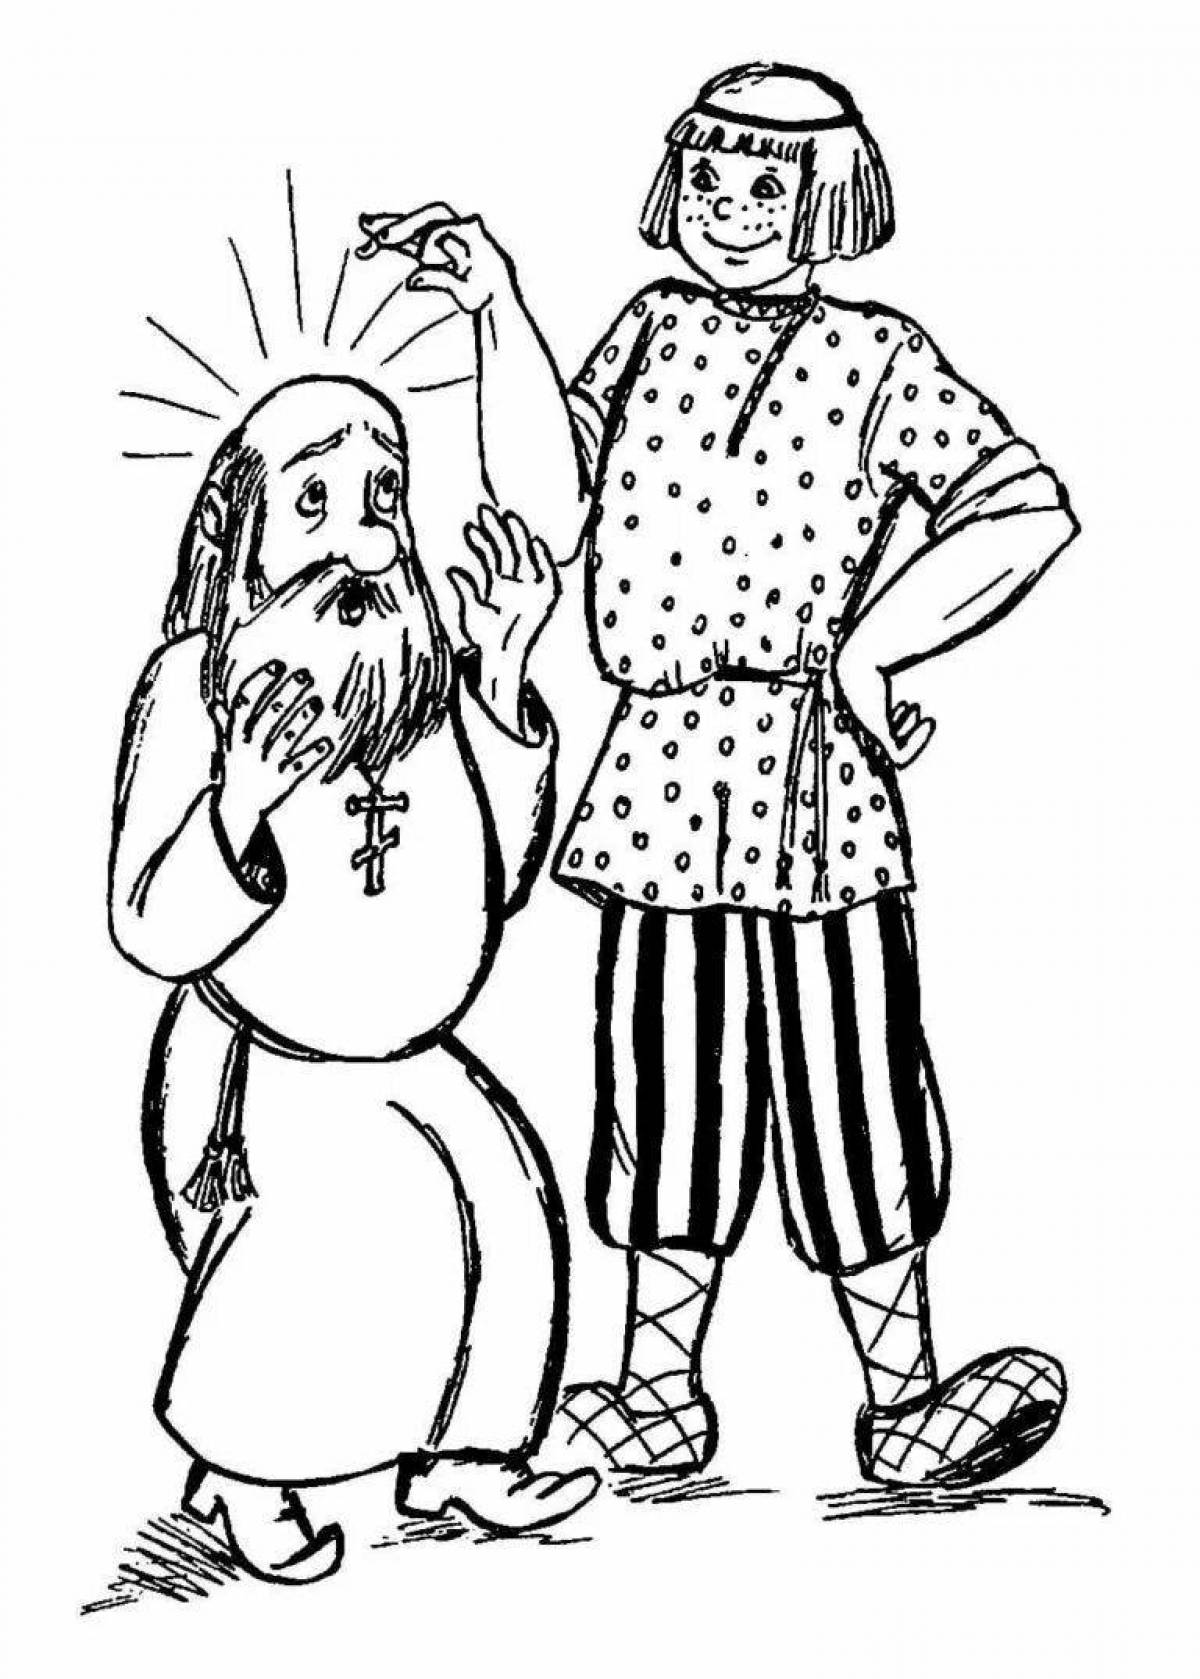 Coloring page priest and worker by luck